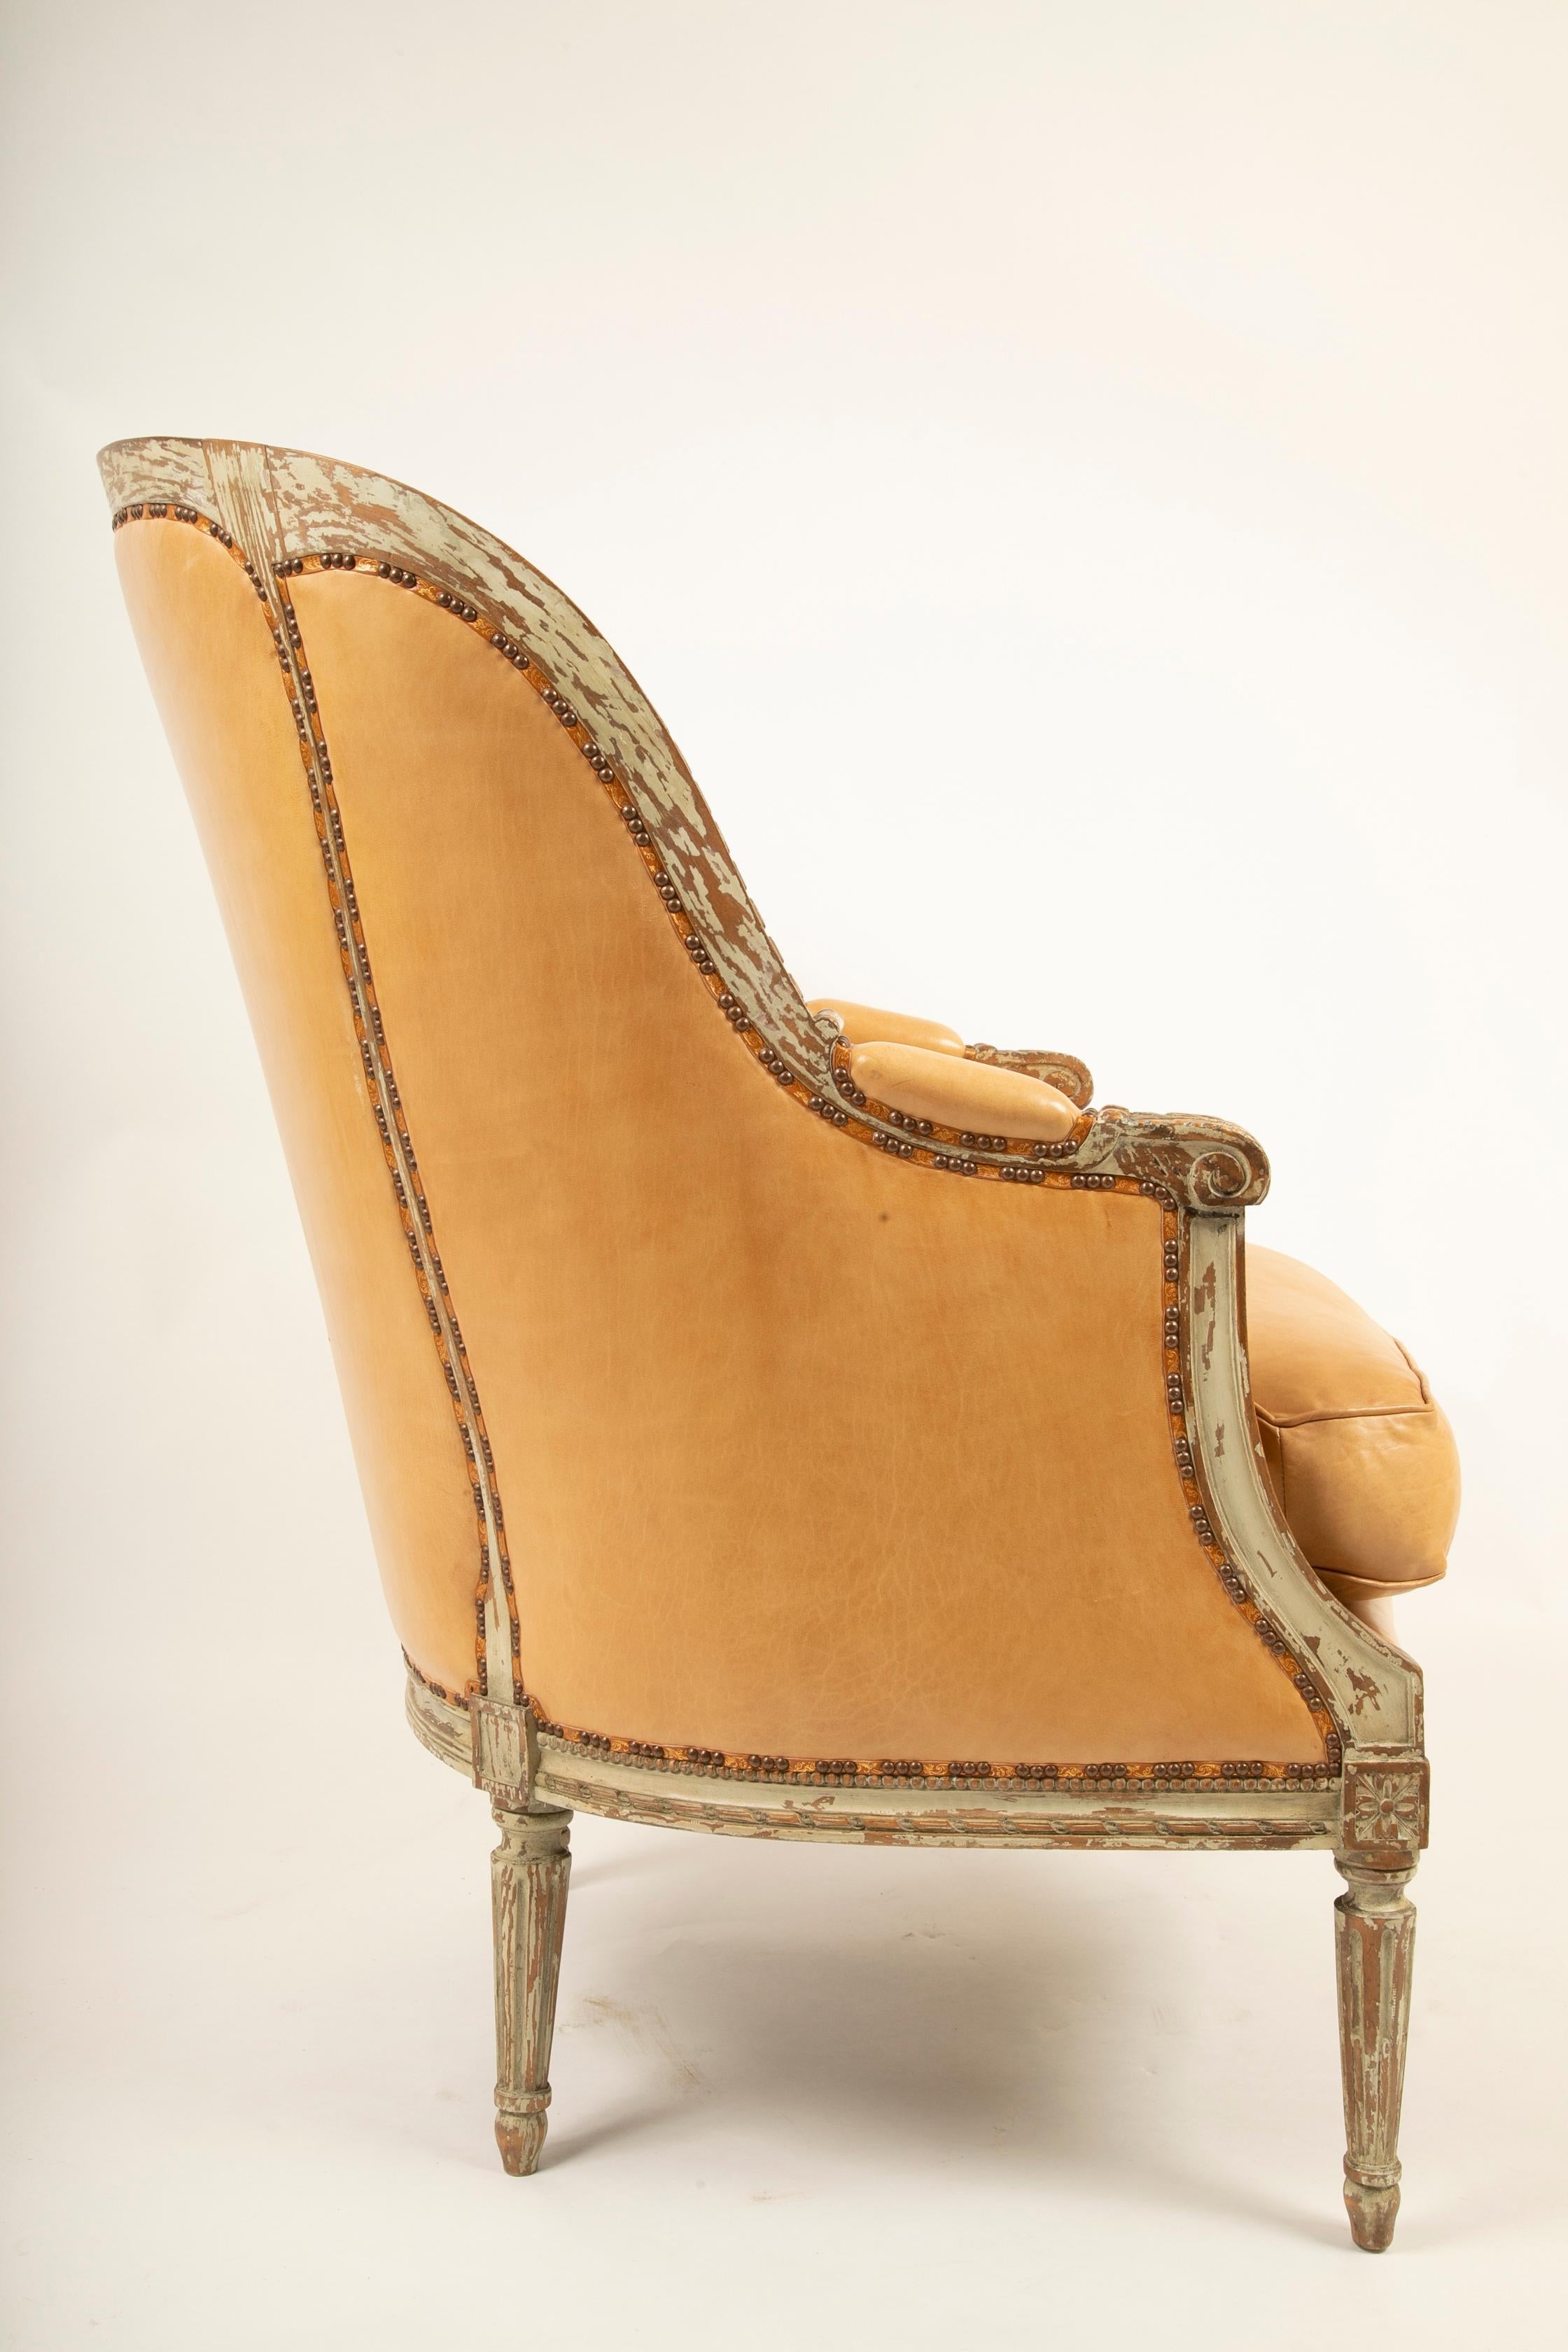 An exceptionally large grey painted Louis XVI style bergère. Upholstered in very high quality leather with parcel gilt leather tape and stop/group decorative tacking, circa late 19th century four available, priced individually.